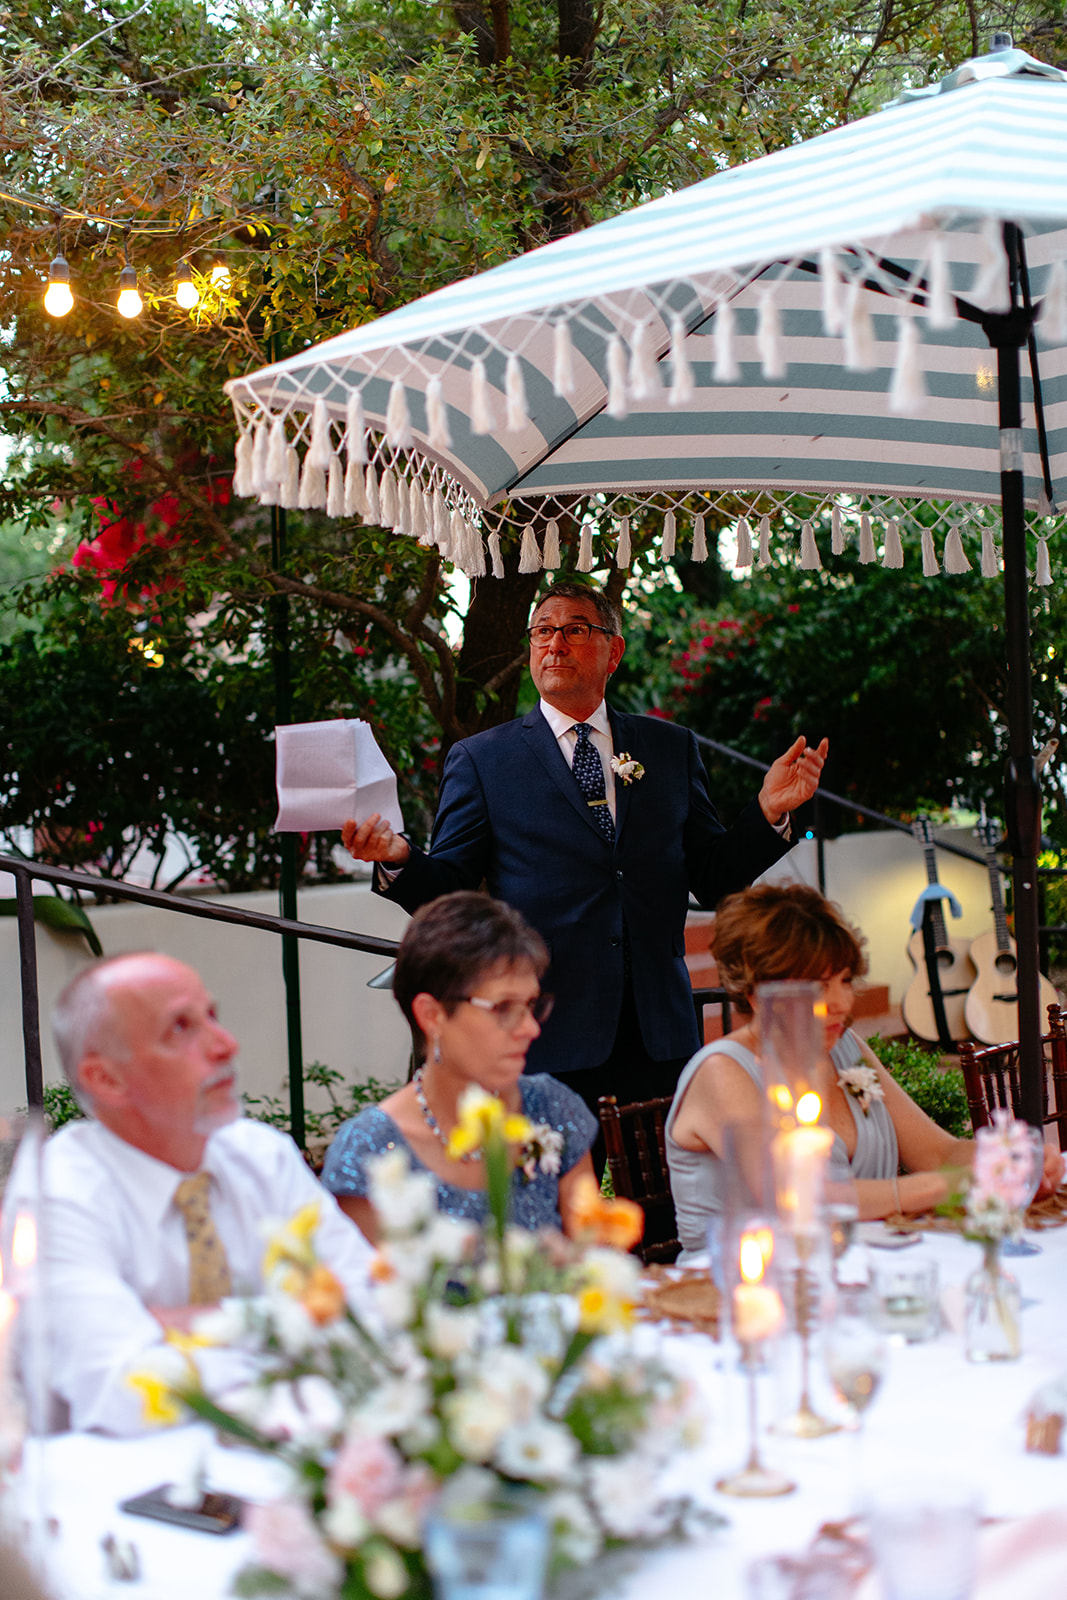 A woman in a pink floral dress reads a note at a candlelit dinner table, smiling, with greenery and string lights in the background at a garden party wedding.